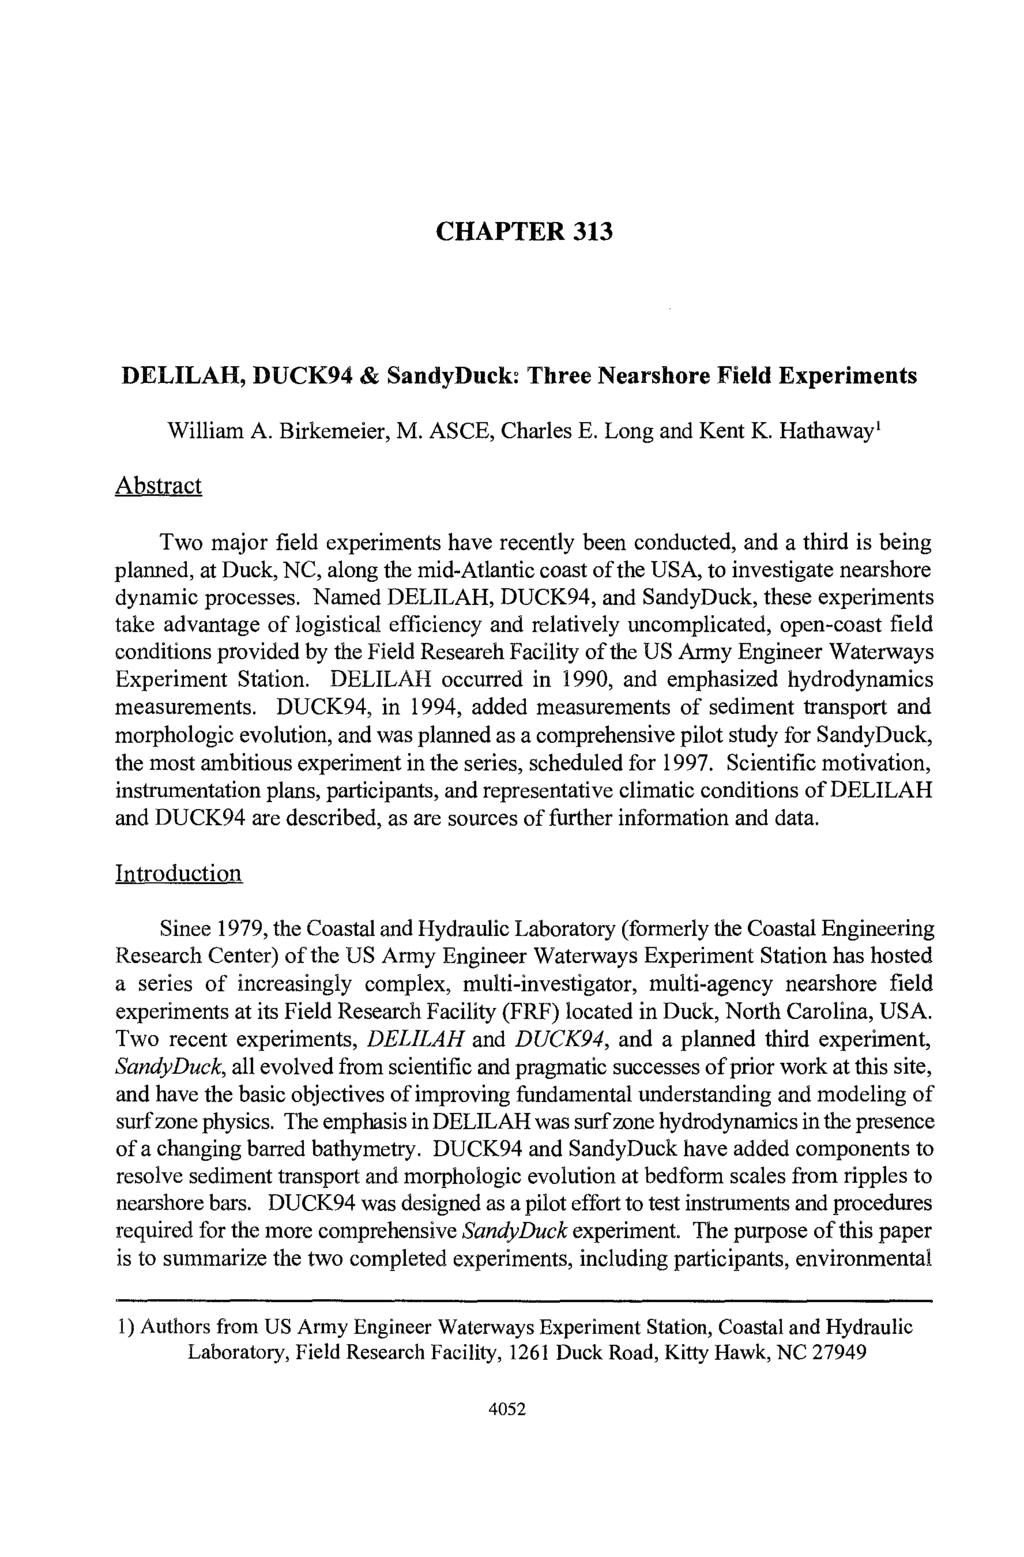 CHAPTER 313 DELILAH, DUCK94 & SandyDuck: Three Nearshore Field Experiments Abstract William A. Birkemeier, M. ASCE, Charles E. Long and Kent K.